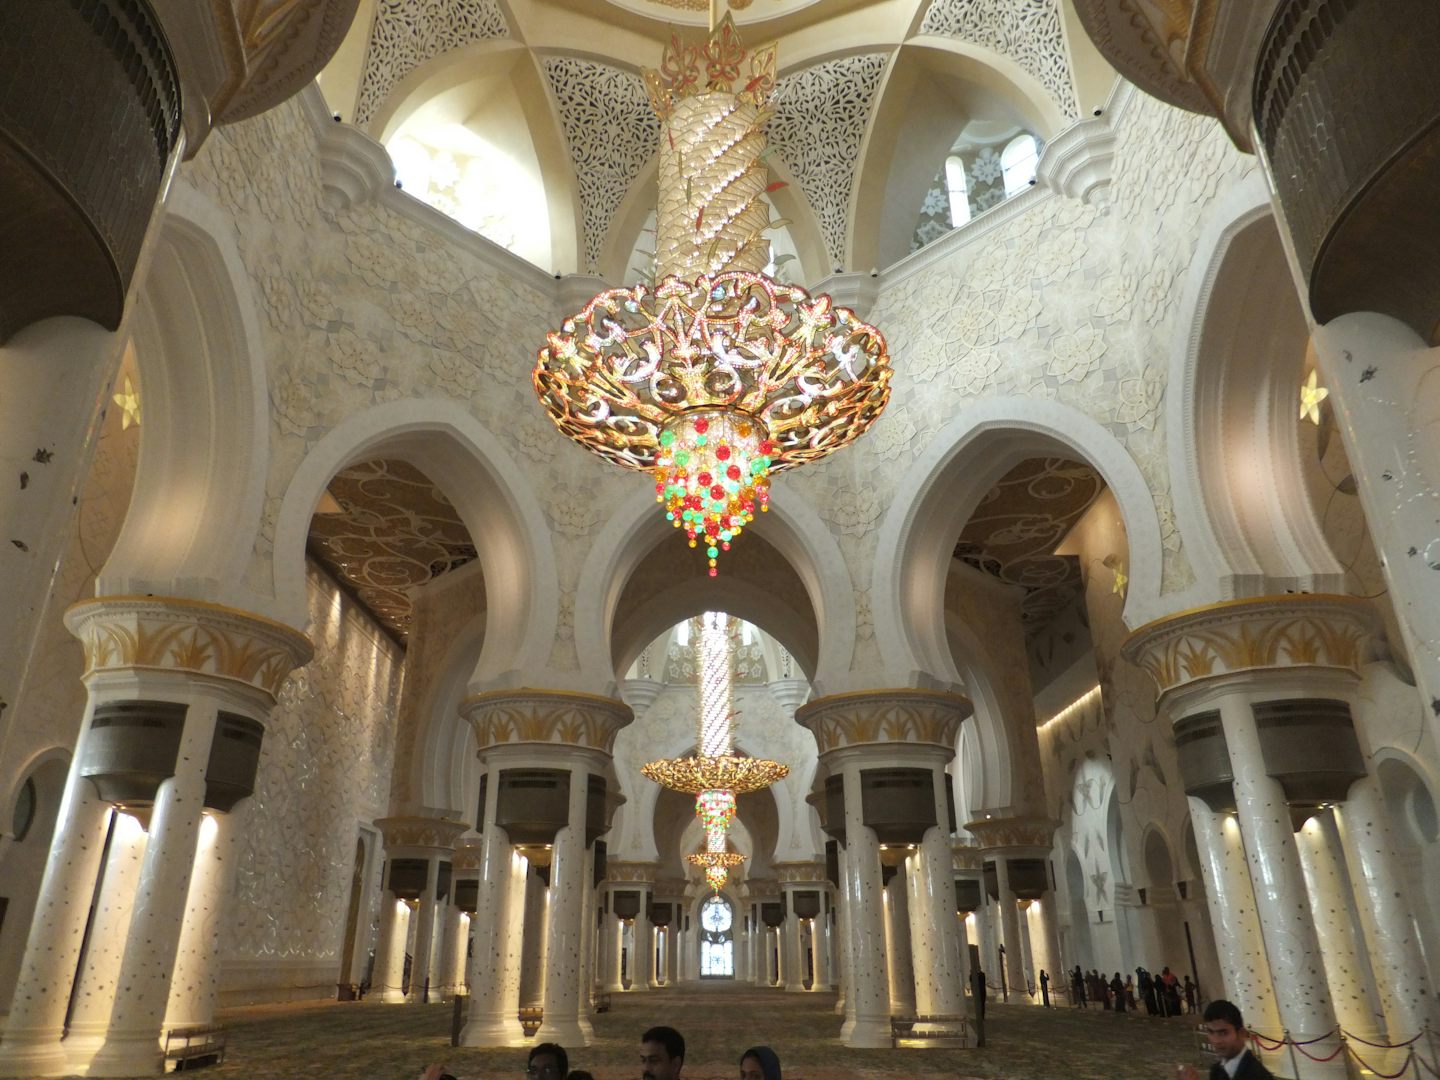 Inside the Grand Mosque